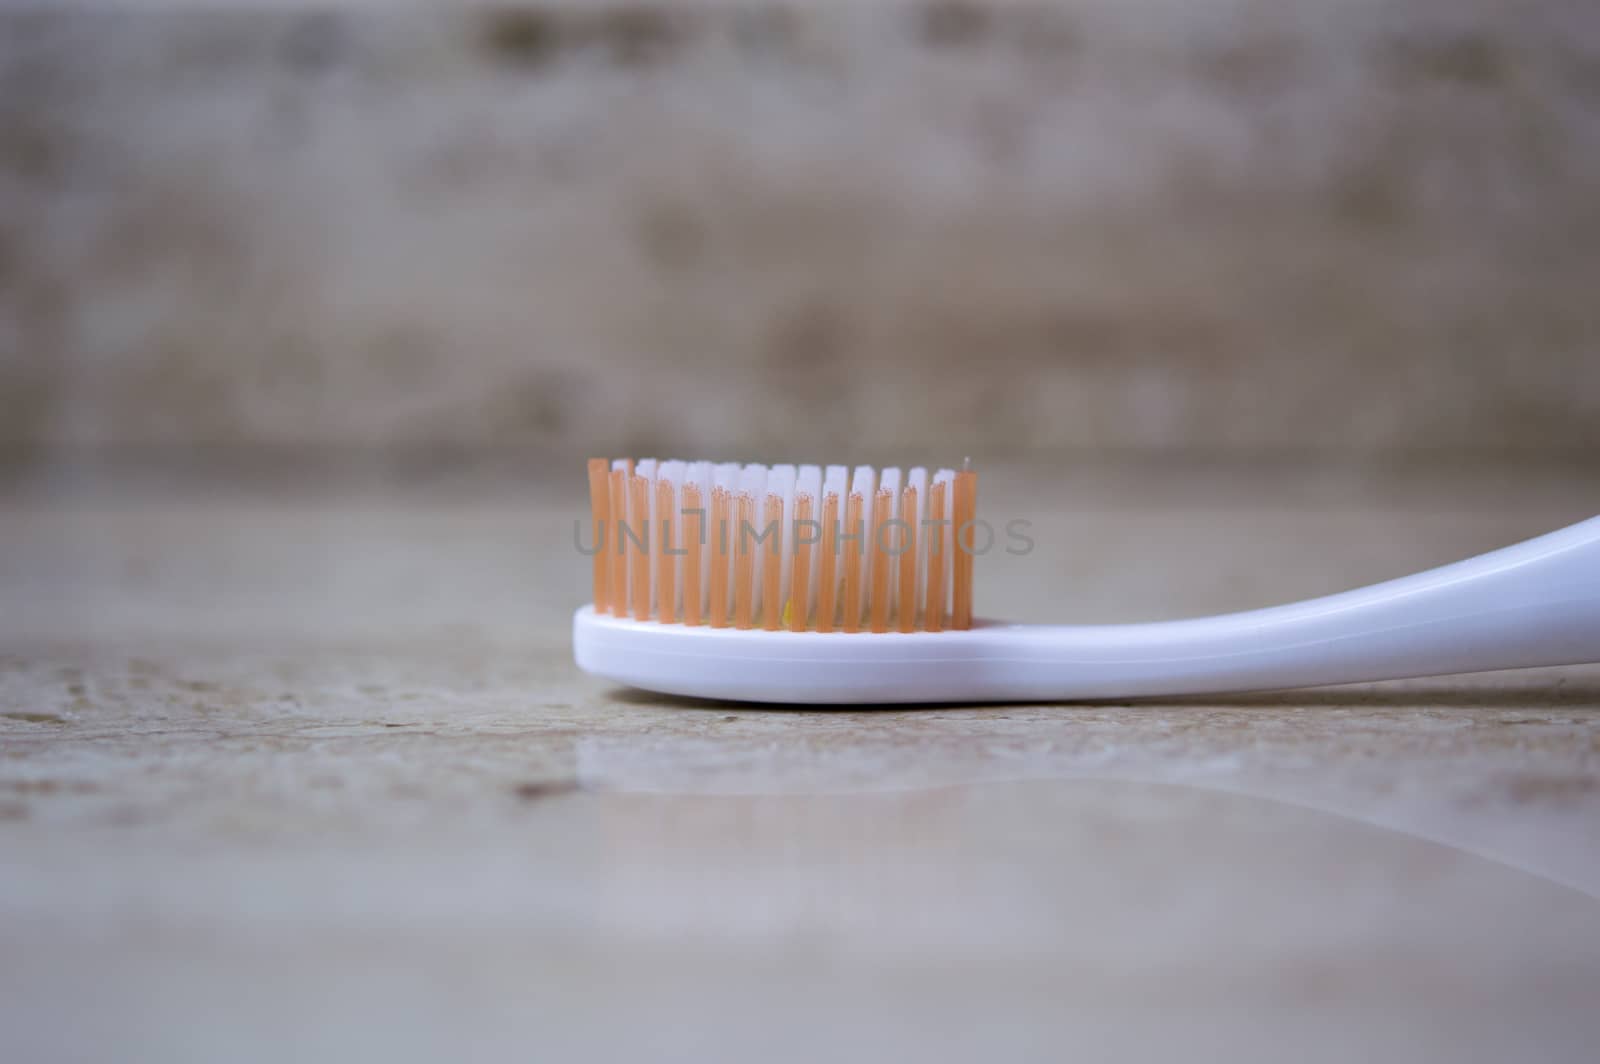 Toothbrush in macro view with blurred background